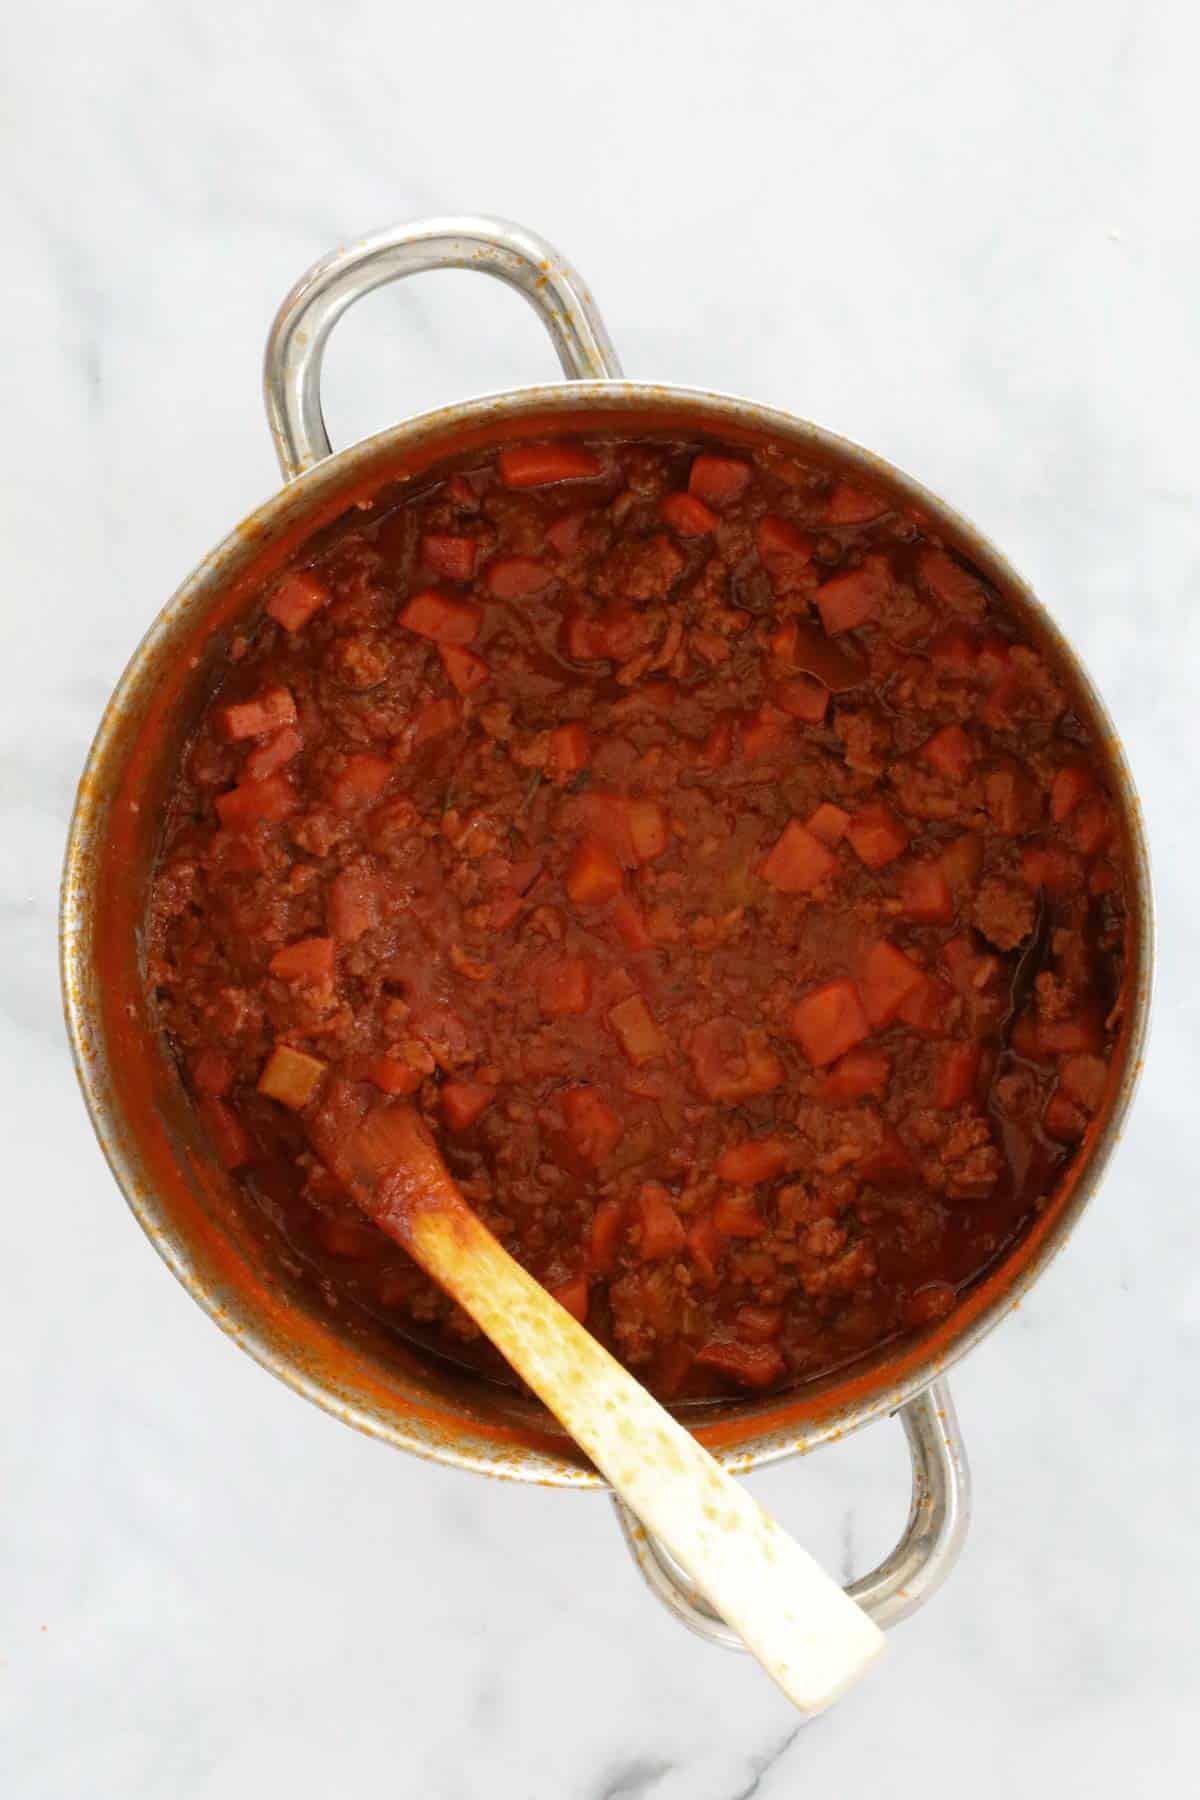 The bolognese after being cooked.